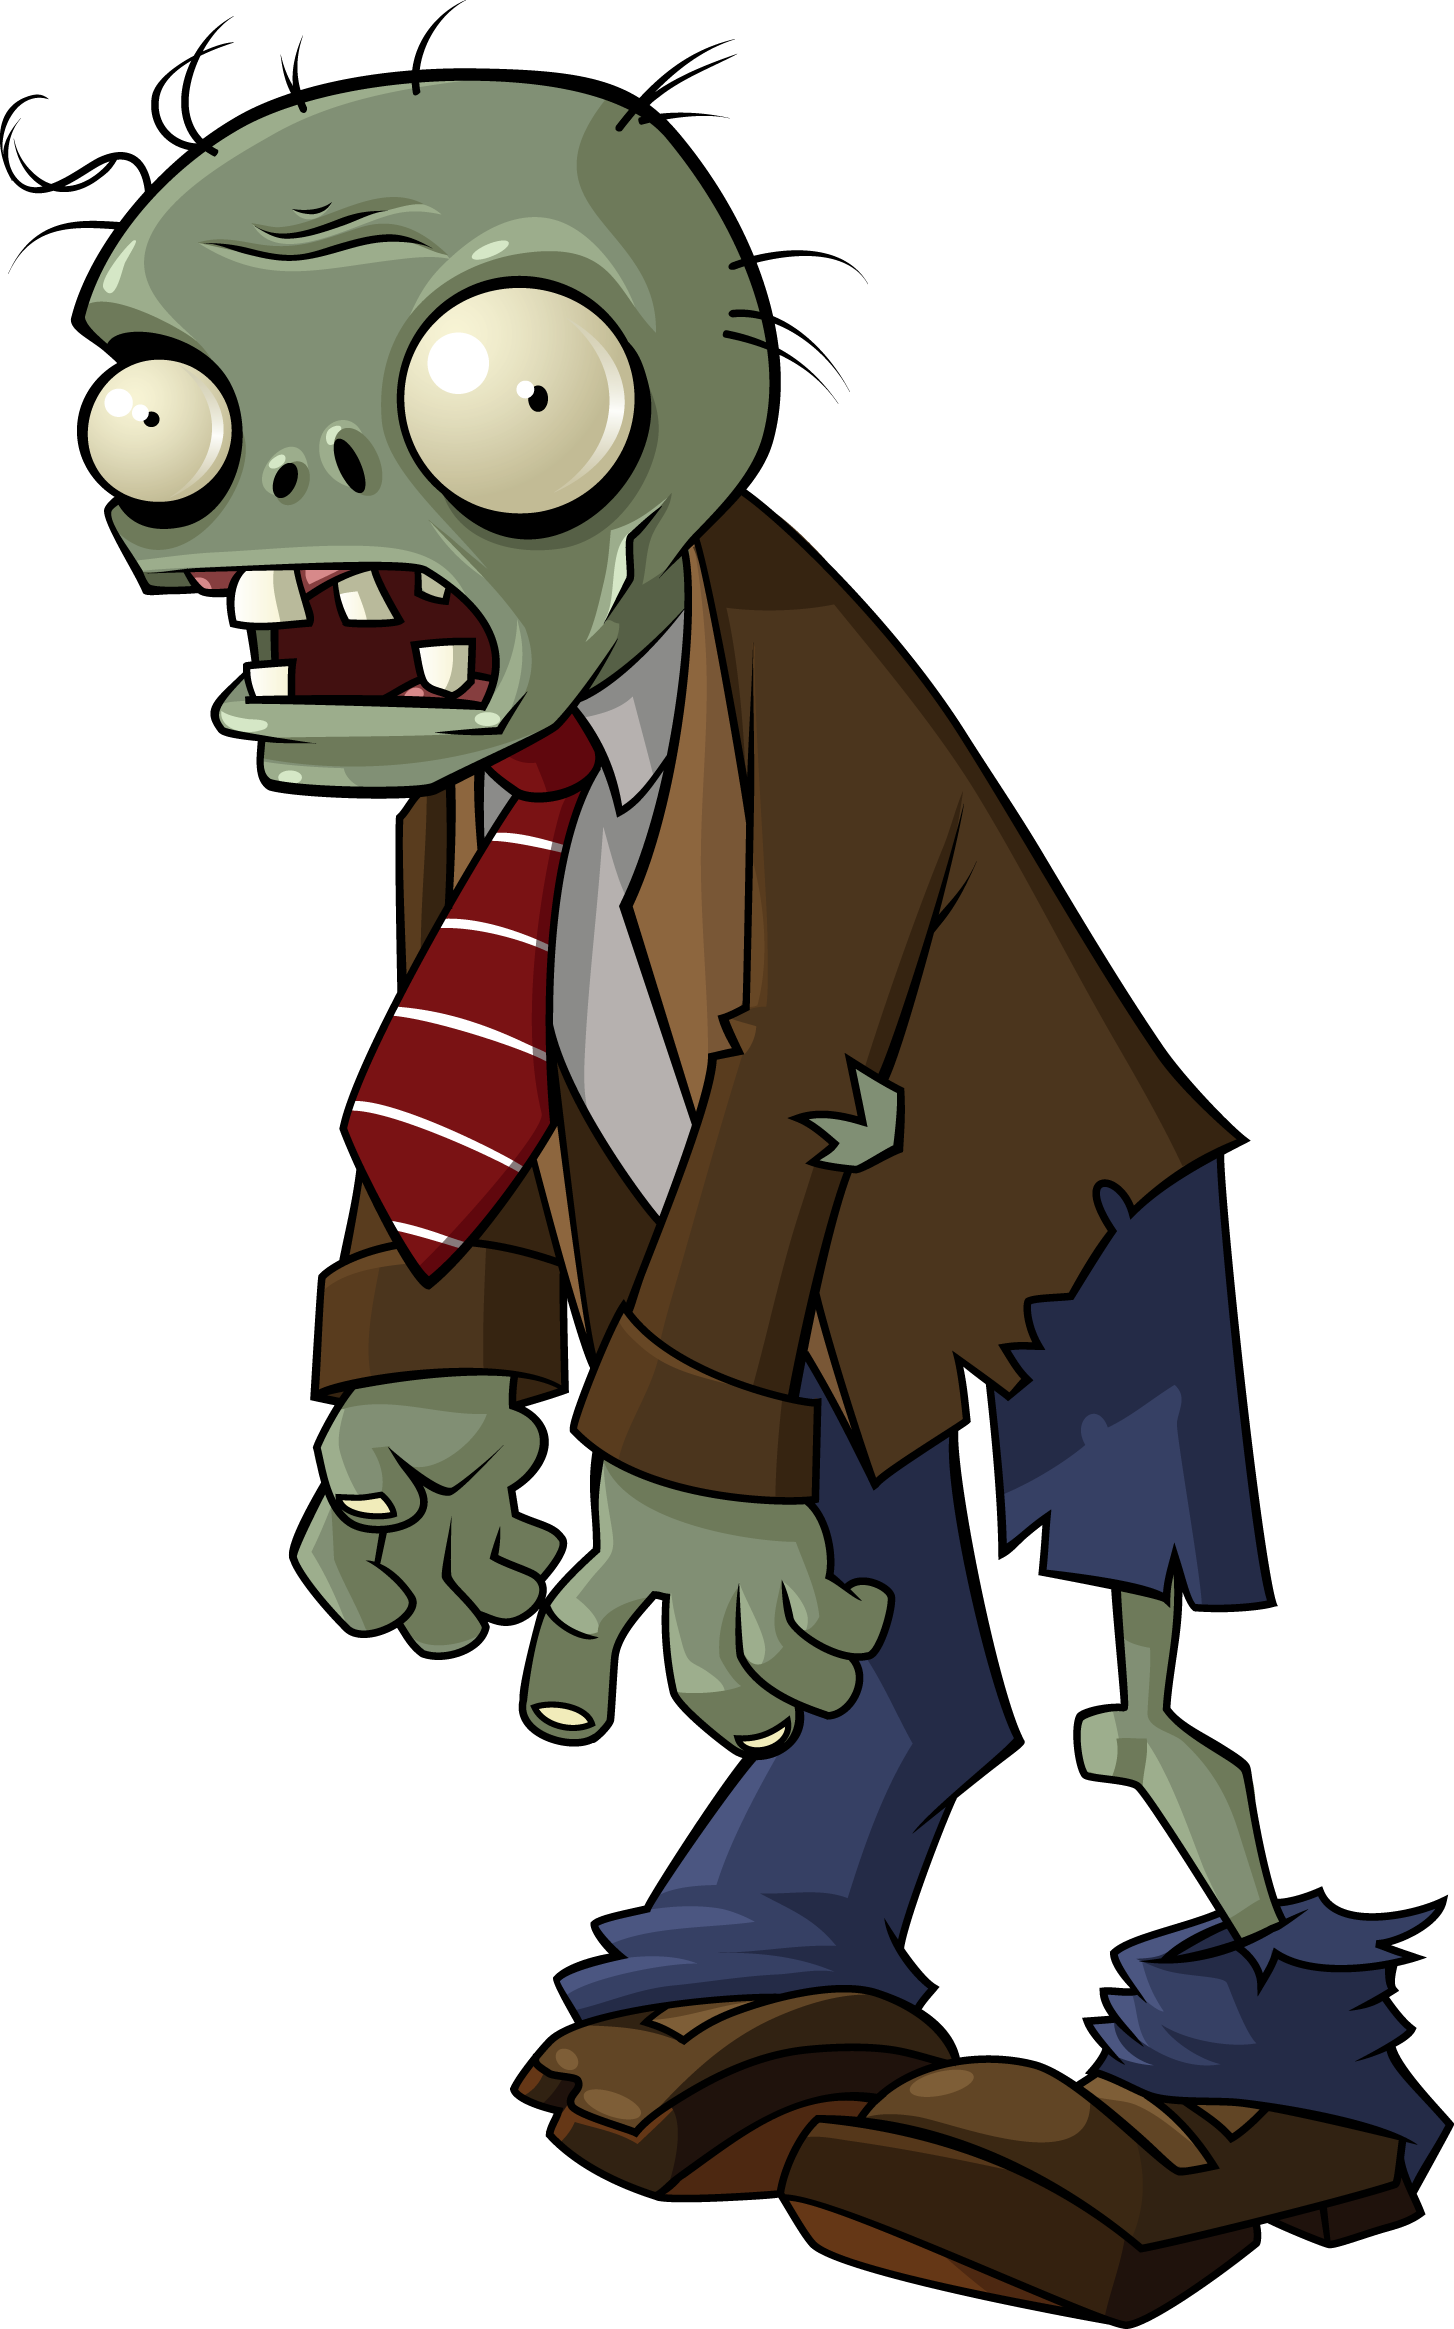 Regular Zombie from Plants vs Zombies  Plant zombie, Plants vs zombies,  Zombie drawings